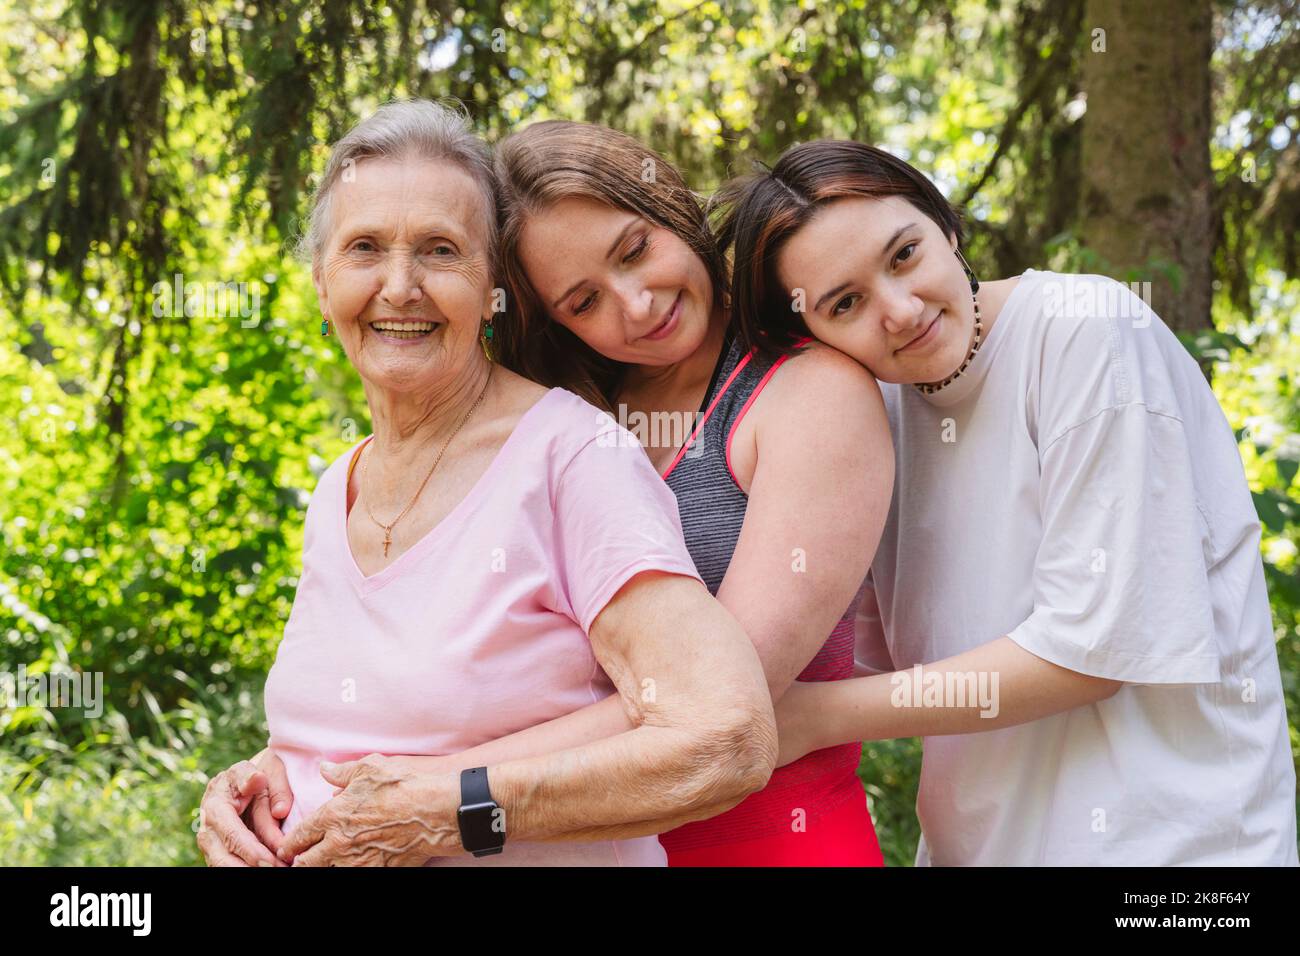 Smiling senior woman with daughter and granddaughter hugging each other at park Stock Photo